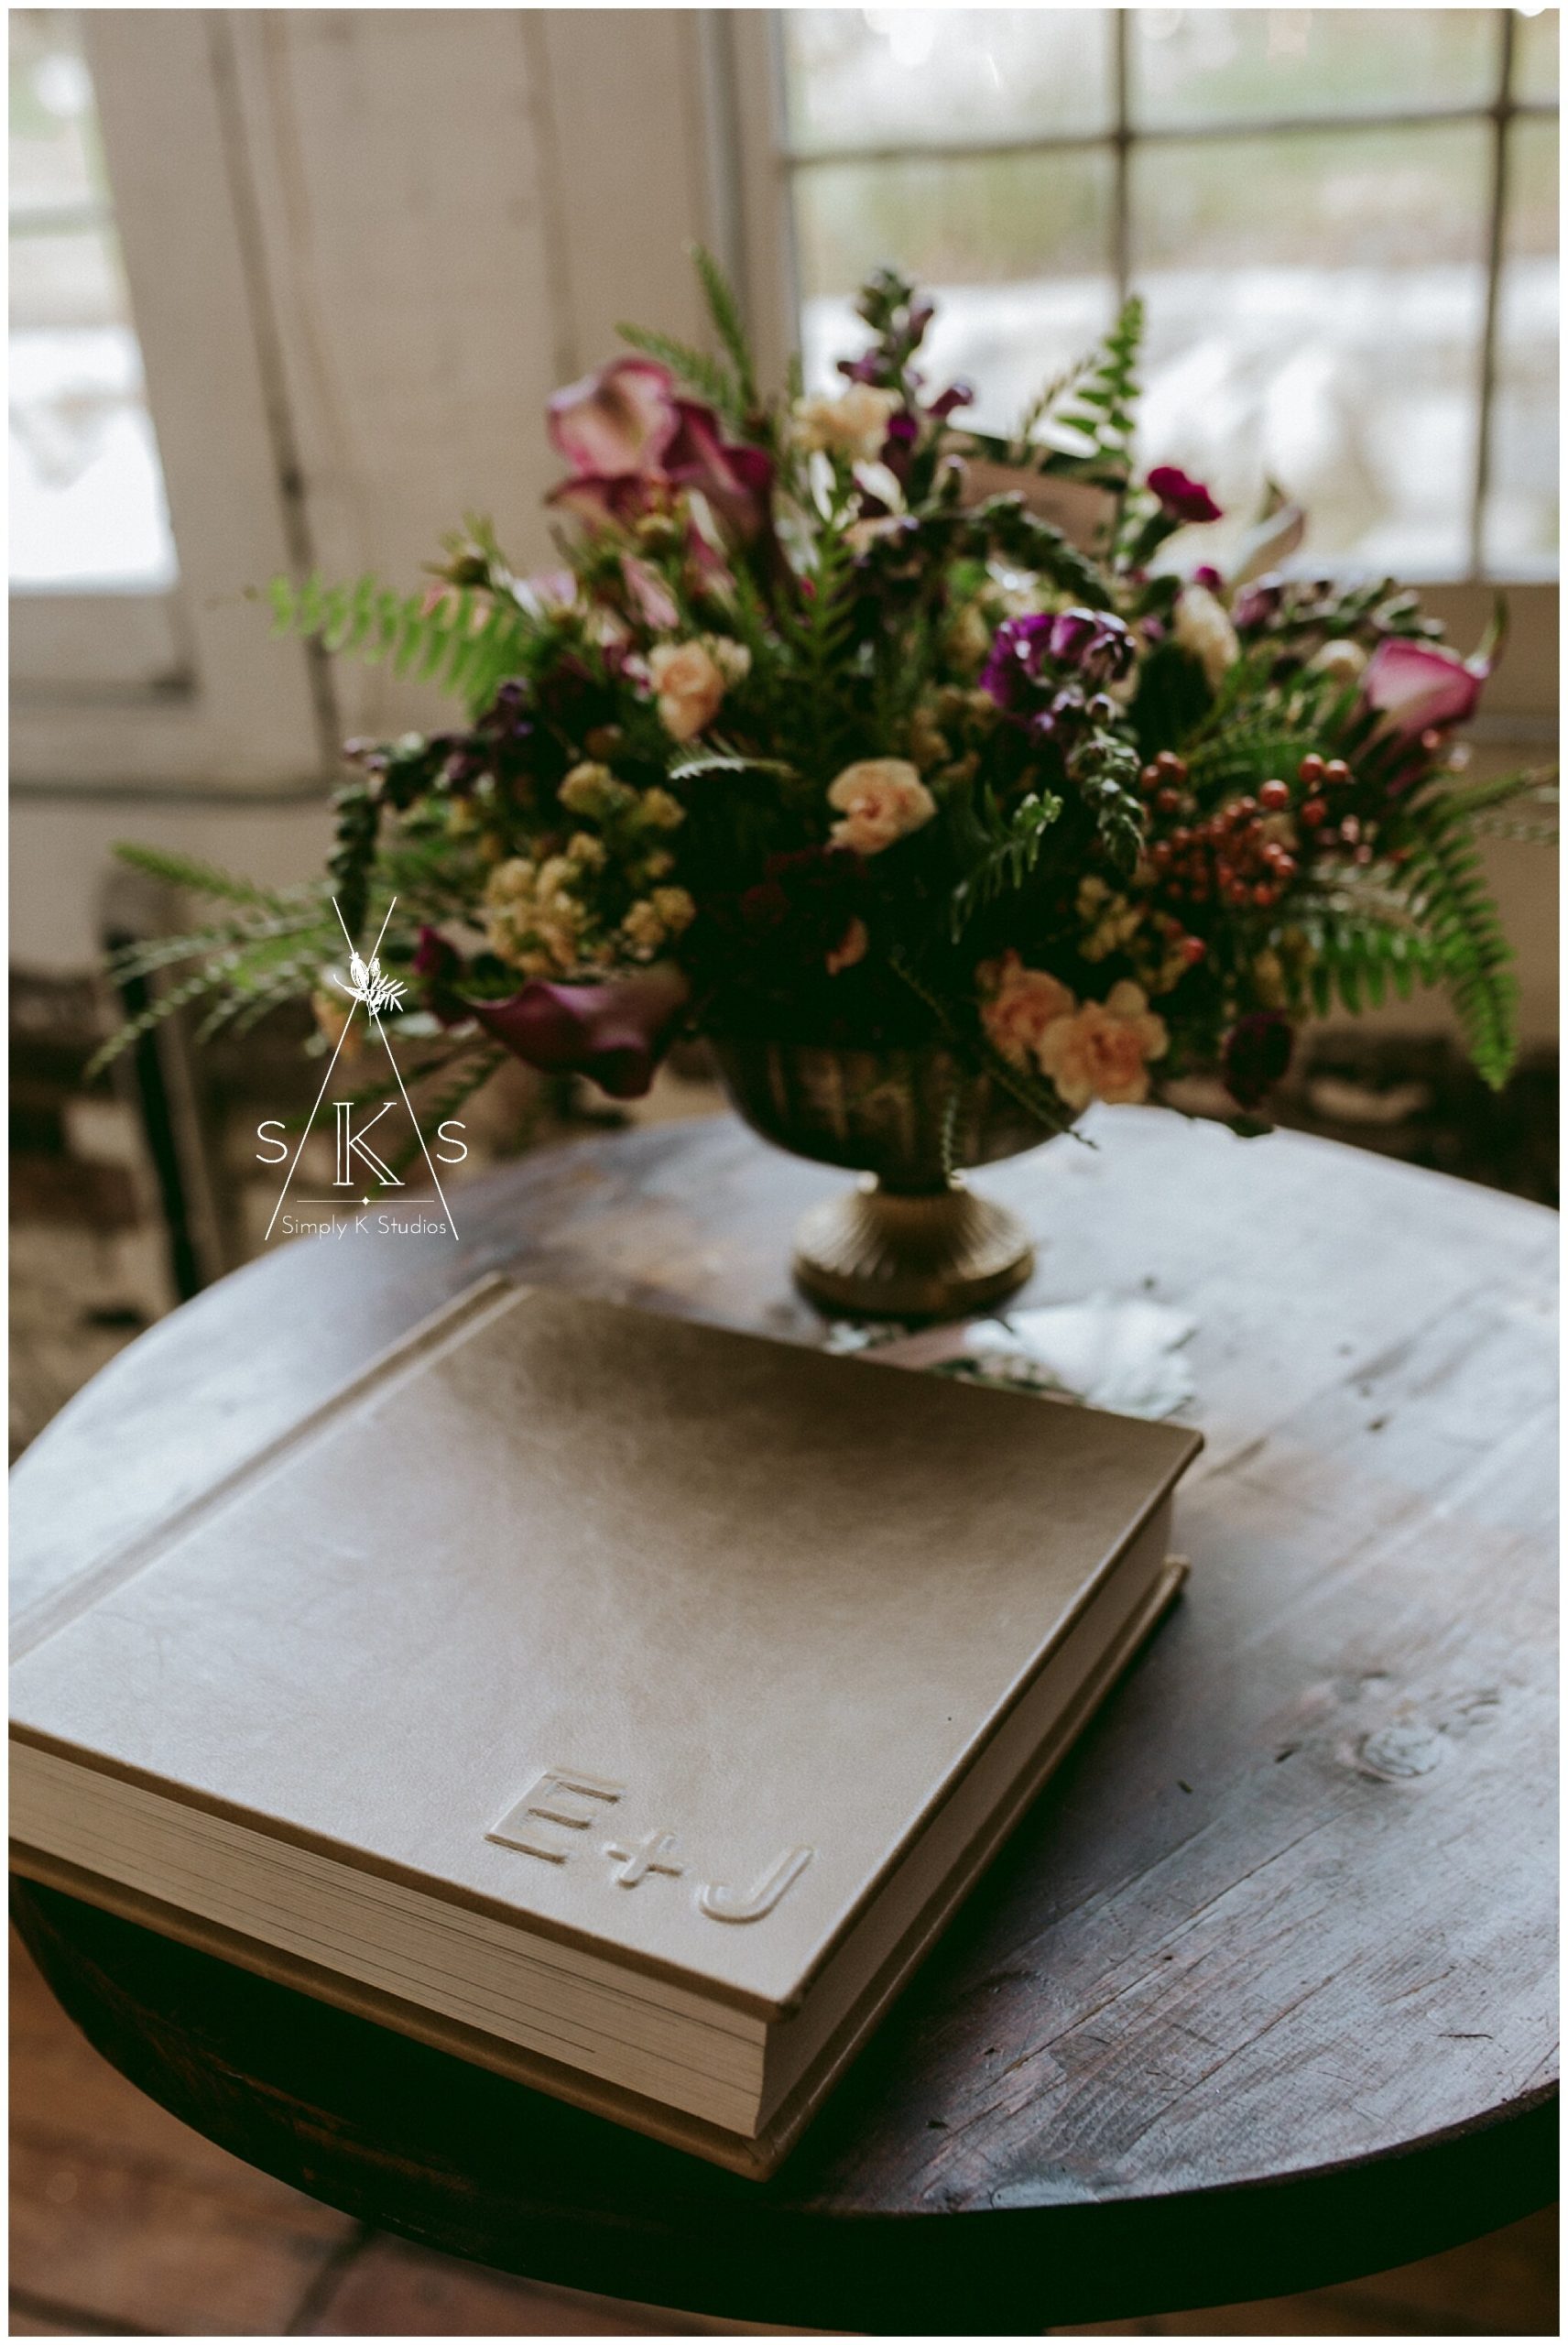  leather wedding album with a floral display 